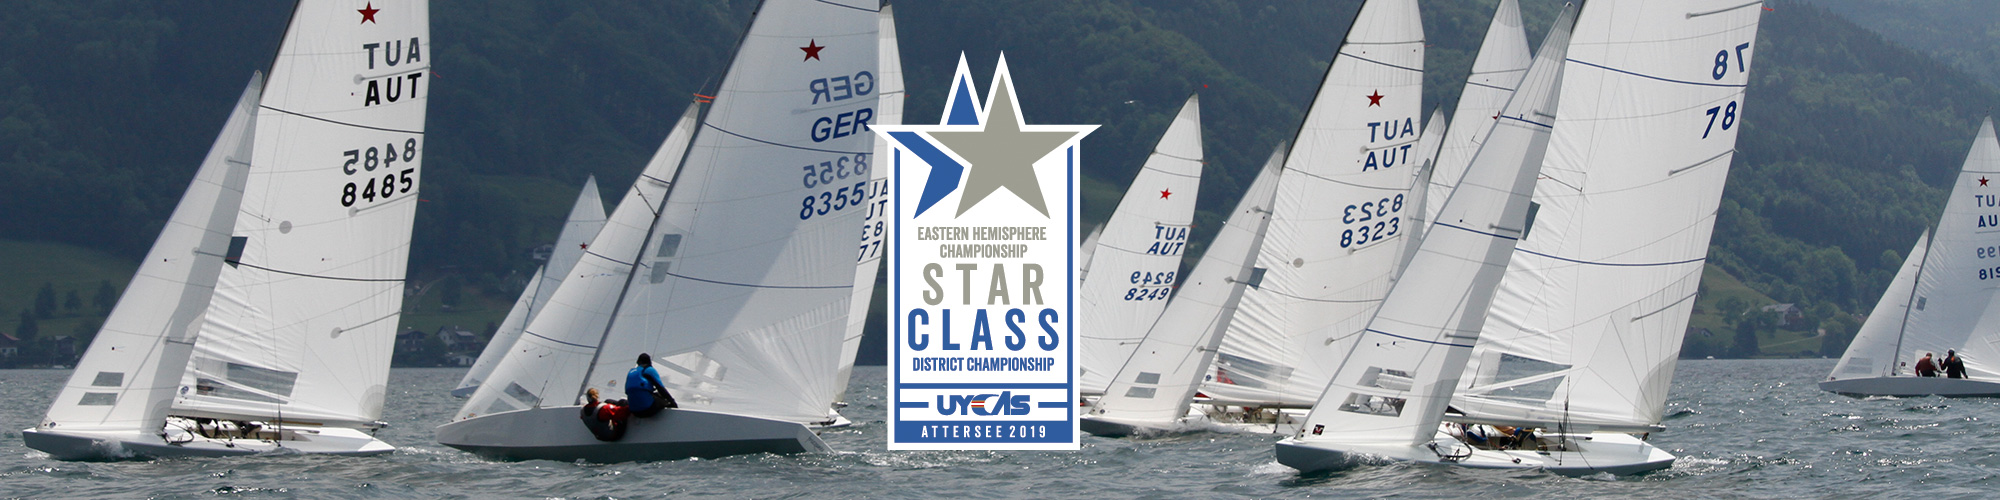  Star  Eastern Hemisphere Championship  Attersee AUT  Day 1